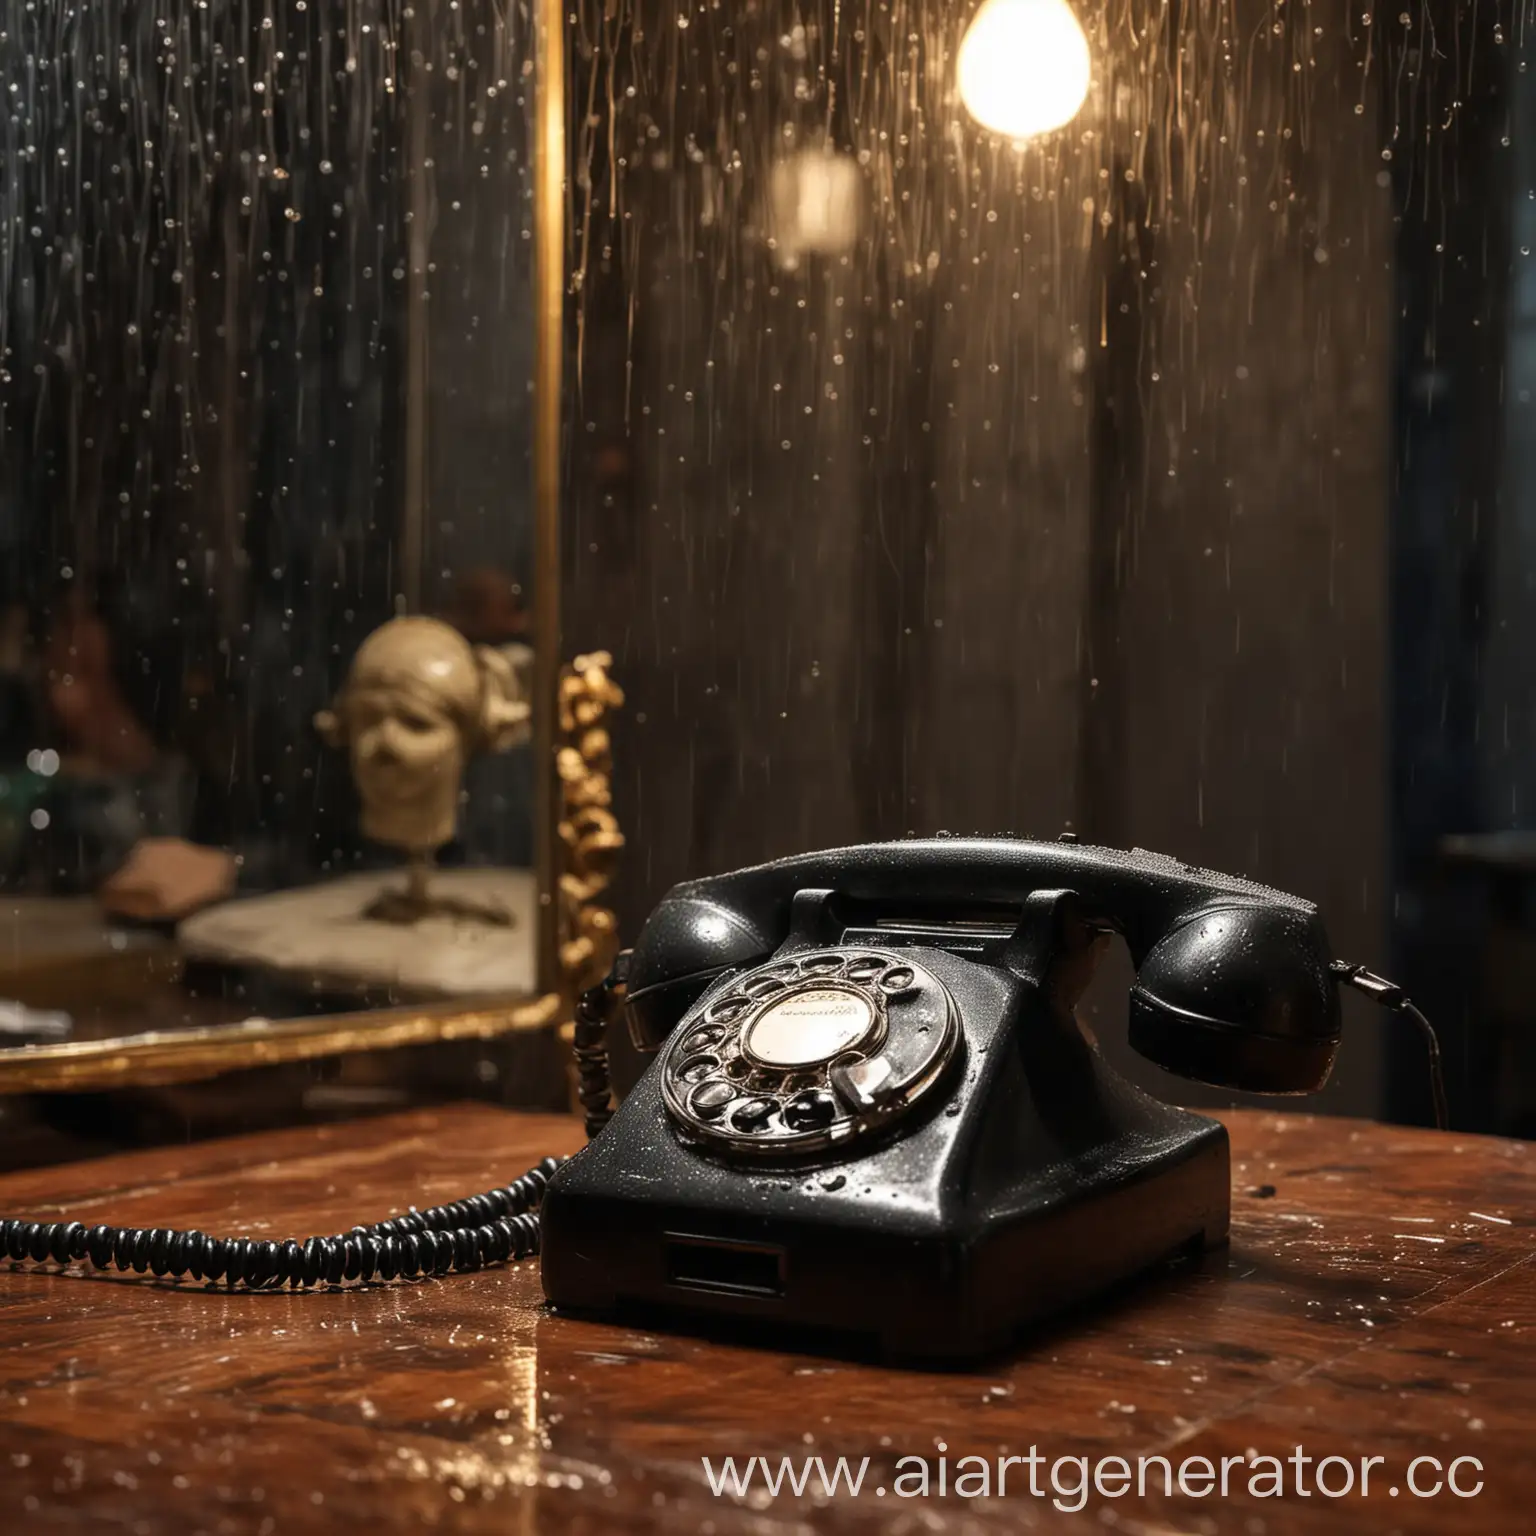 Vintage-Telephone-with-Mirror-and-Reflection-in-Night-Rain